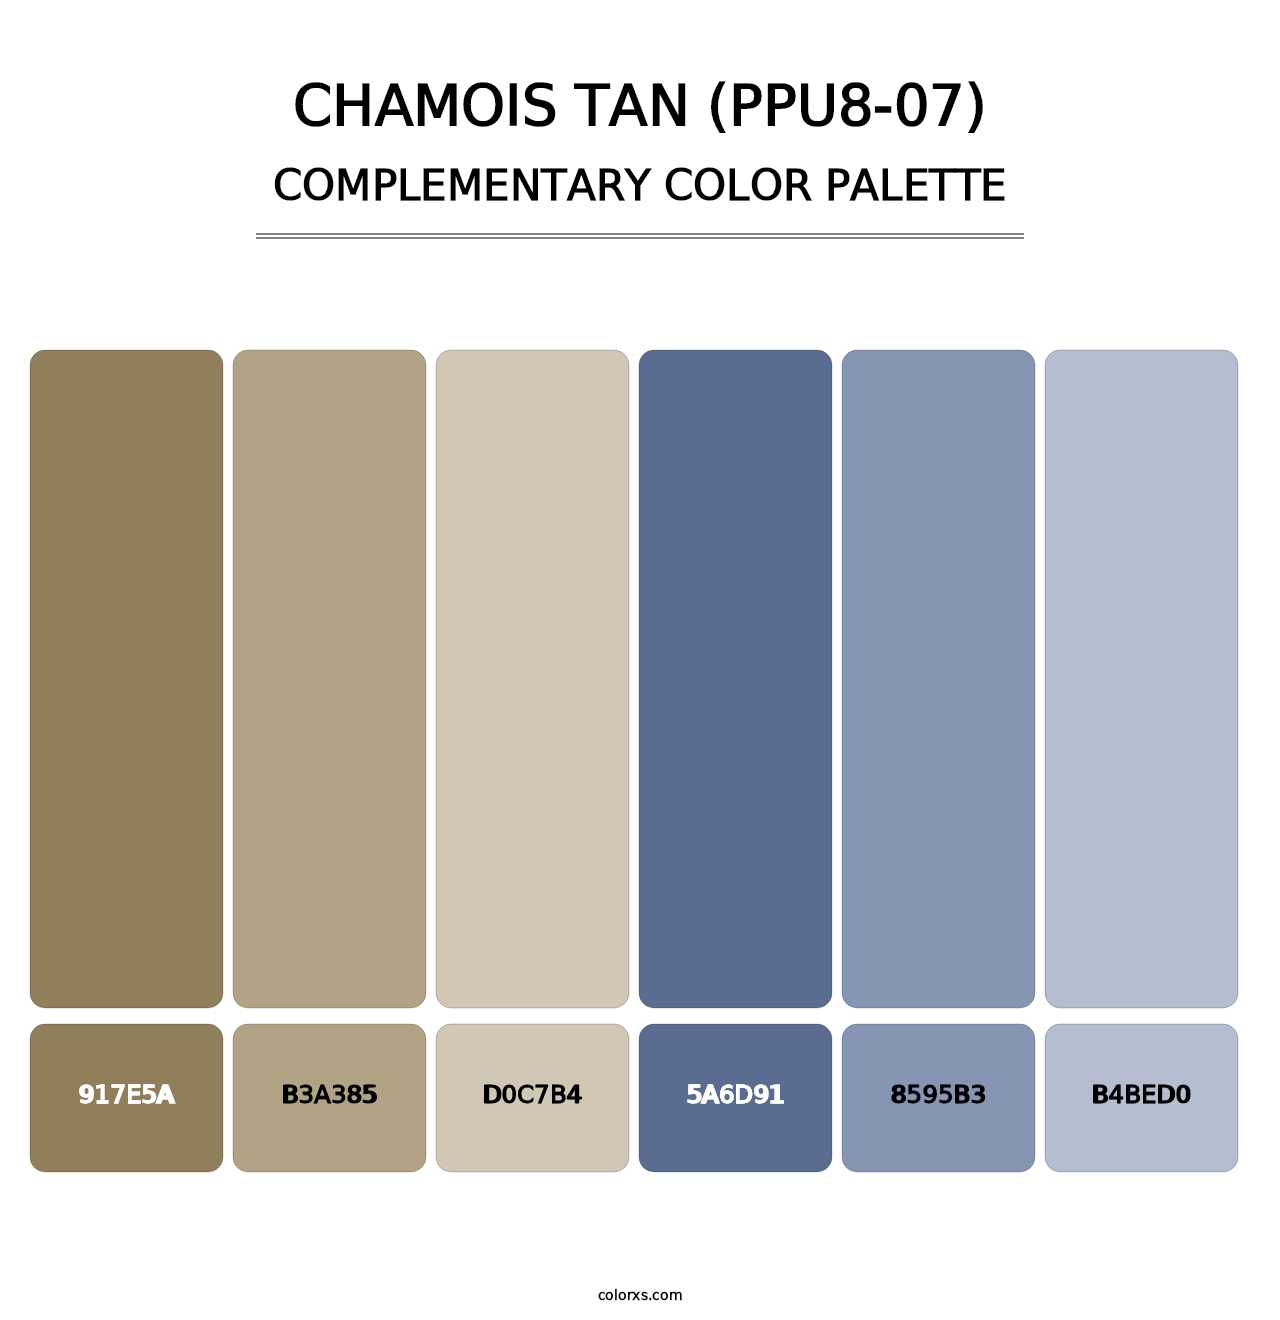 Chamois Tan (PPU8-07) - Complementary Color Palette